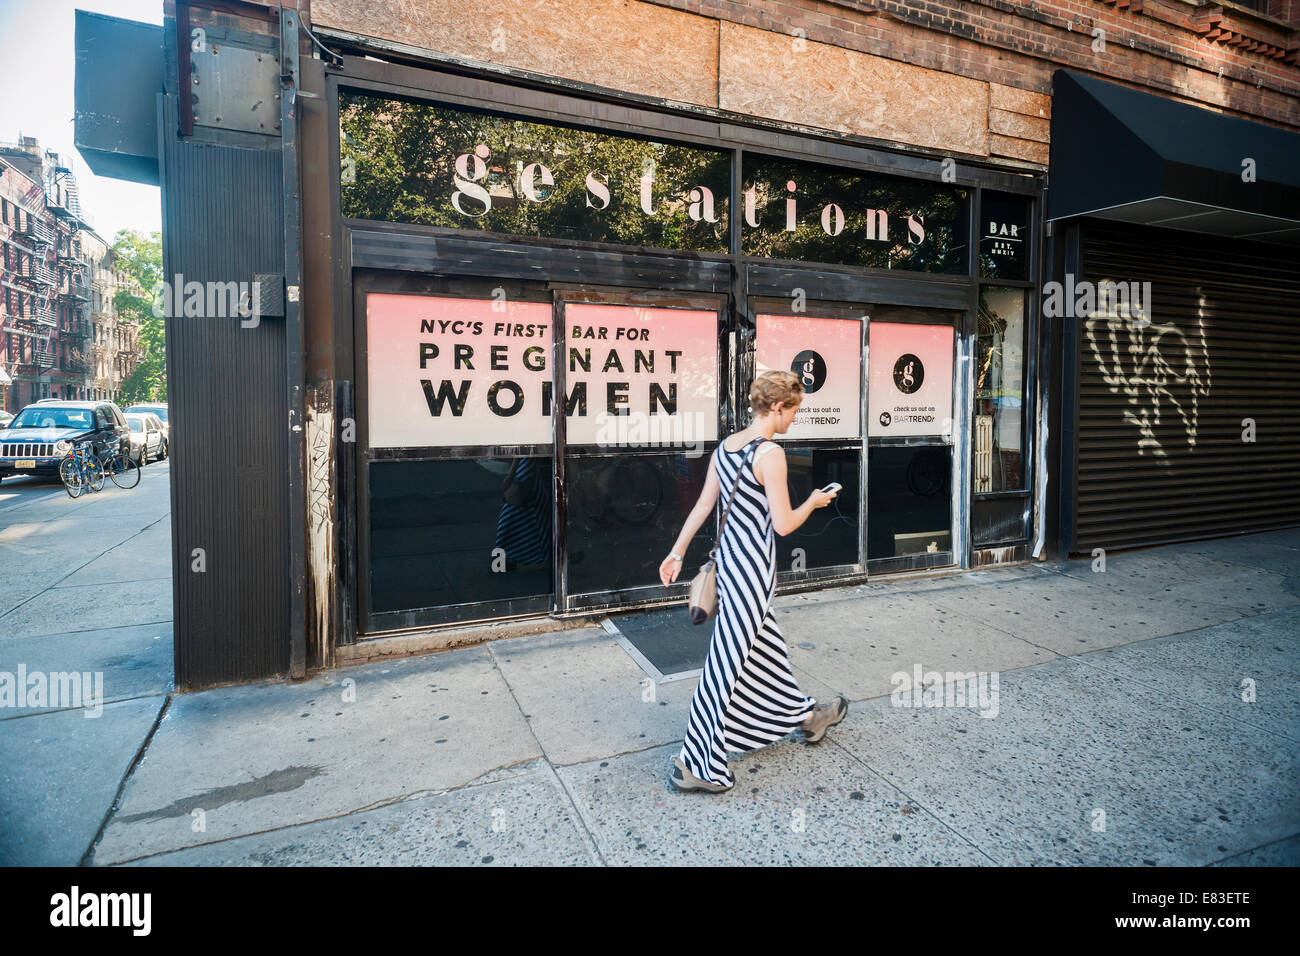 Gestations, NYC's first bar for pregnant women Stock Photo